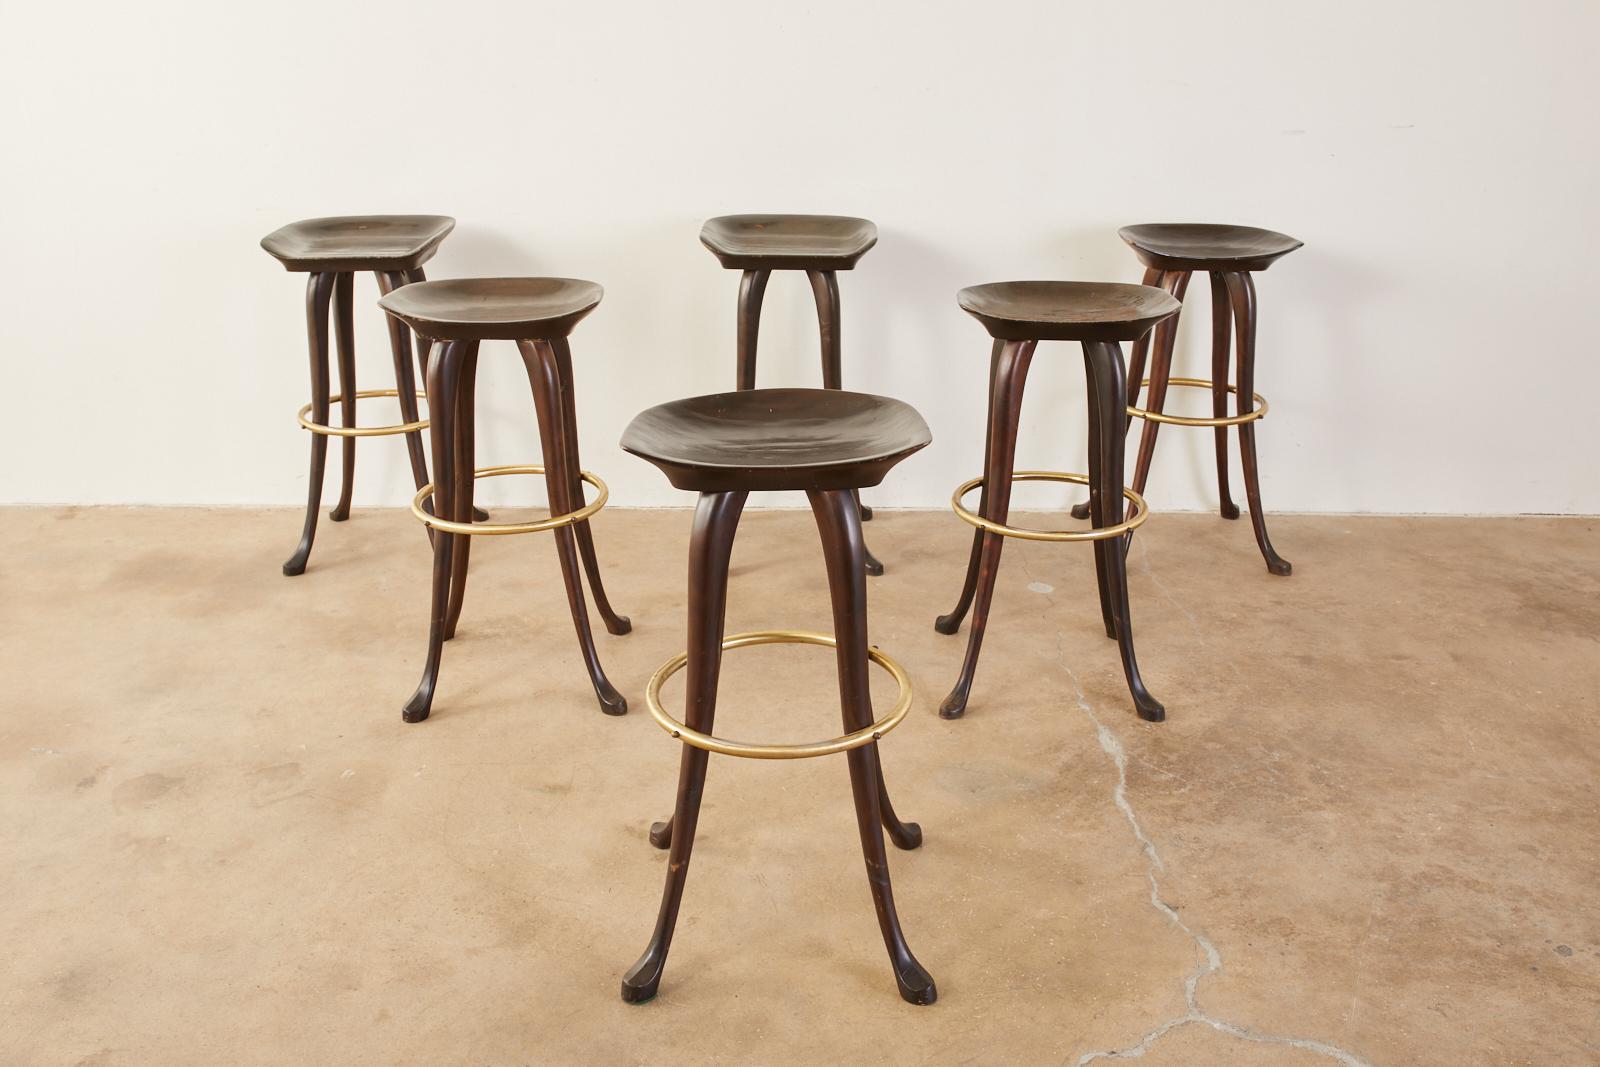 Rare set of six carved bar height stools handcrafted by Jean of Topanga California. The stools feature a carved saddle style seat supported by elegant, long legs ending with hoof style feet. The legs are conjoined by a brass toned ring stretcher